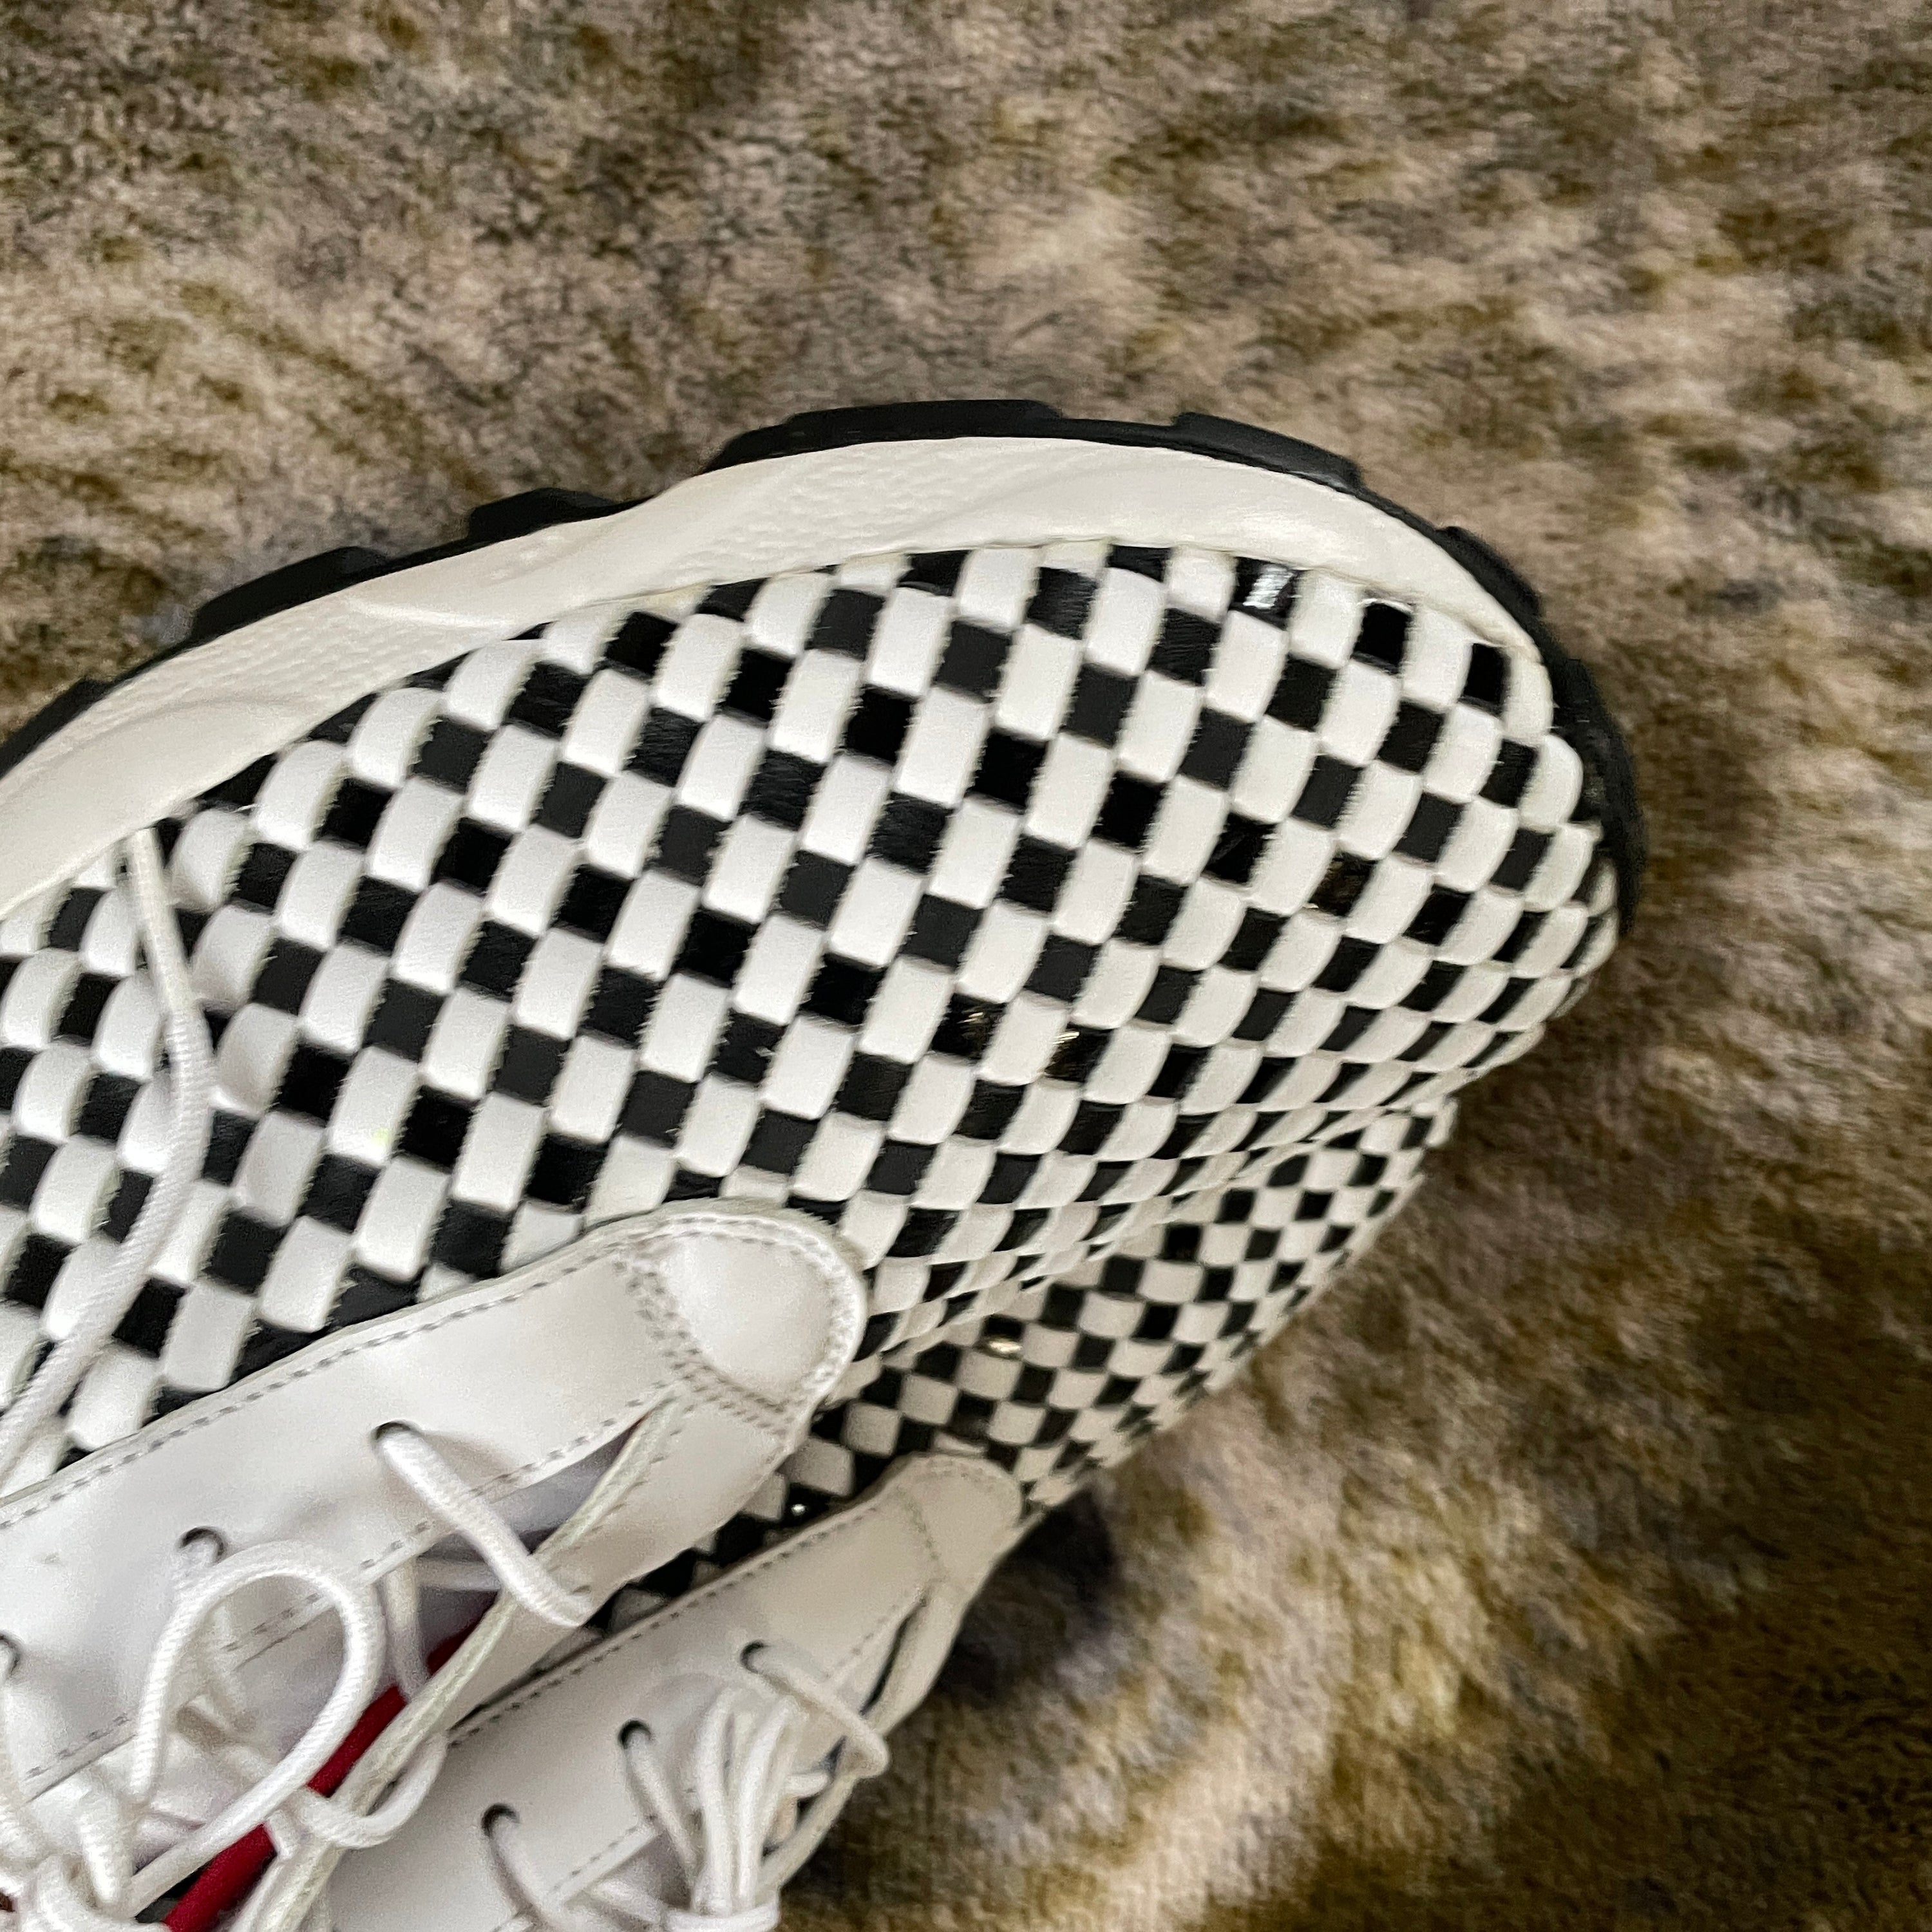 US 12 - NIKE AIR FOOTSCAPE WOVEN "WHITE BLACK" [2007]